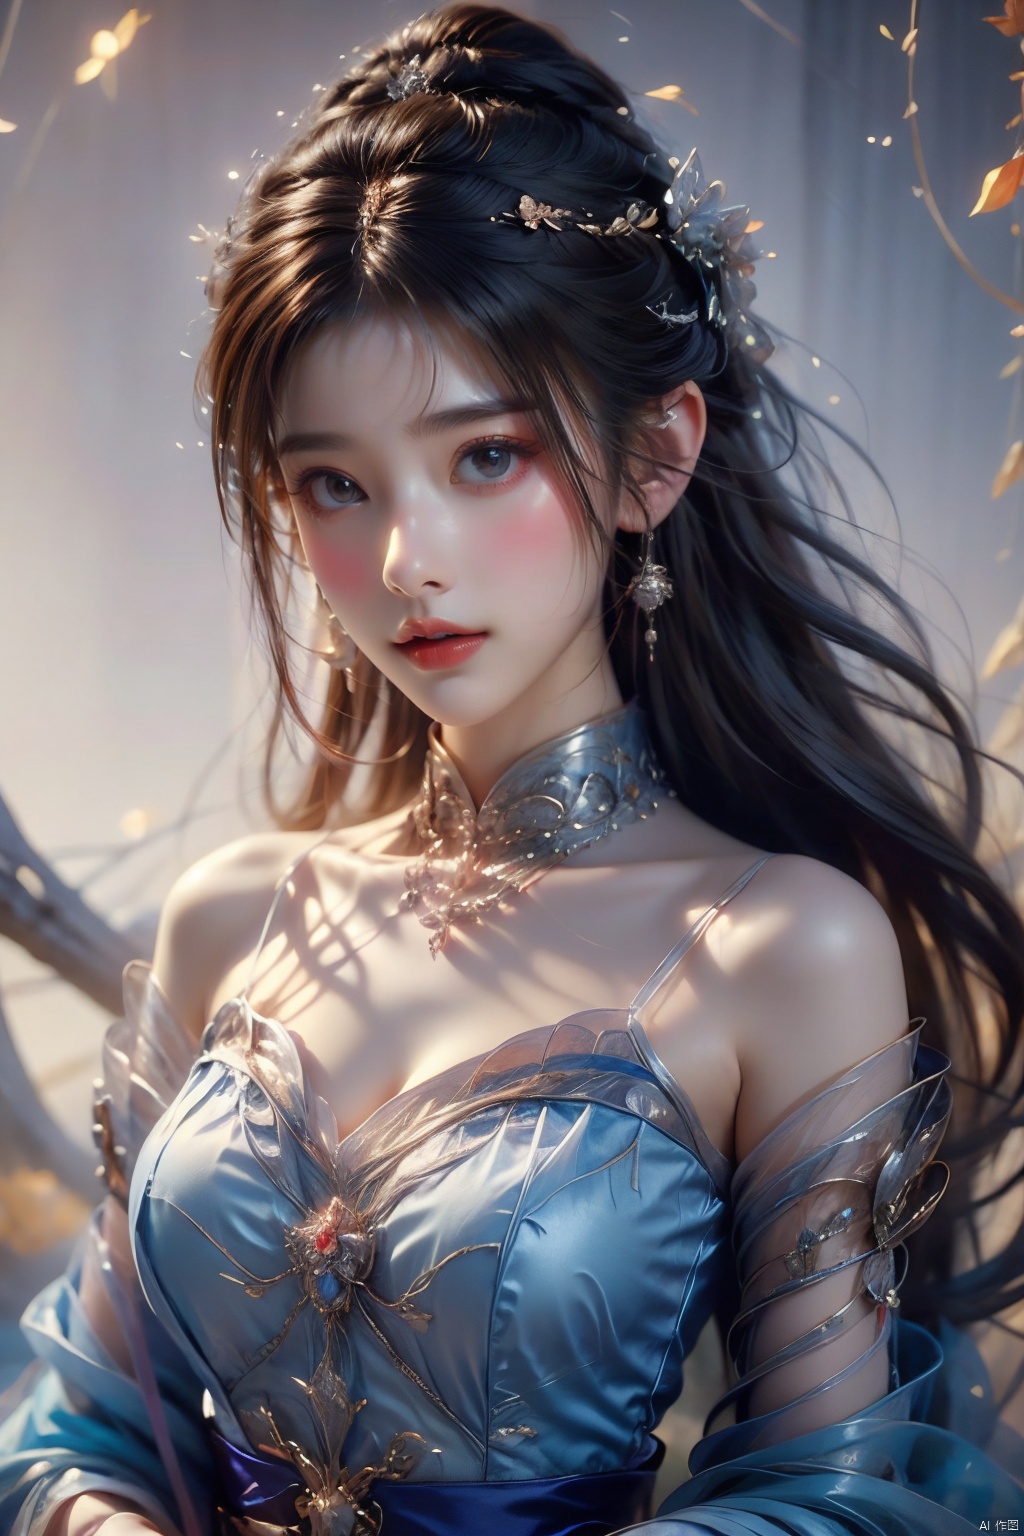 A bust portrait of an ancient beauty with exquisite features and unparalleled looks, dressed in lavish traditional attire and adorned with complex hair accessories, her gaze deep and mysterious, as if narrating a millennia-old tale., wunv